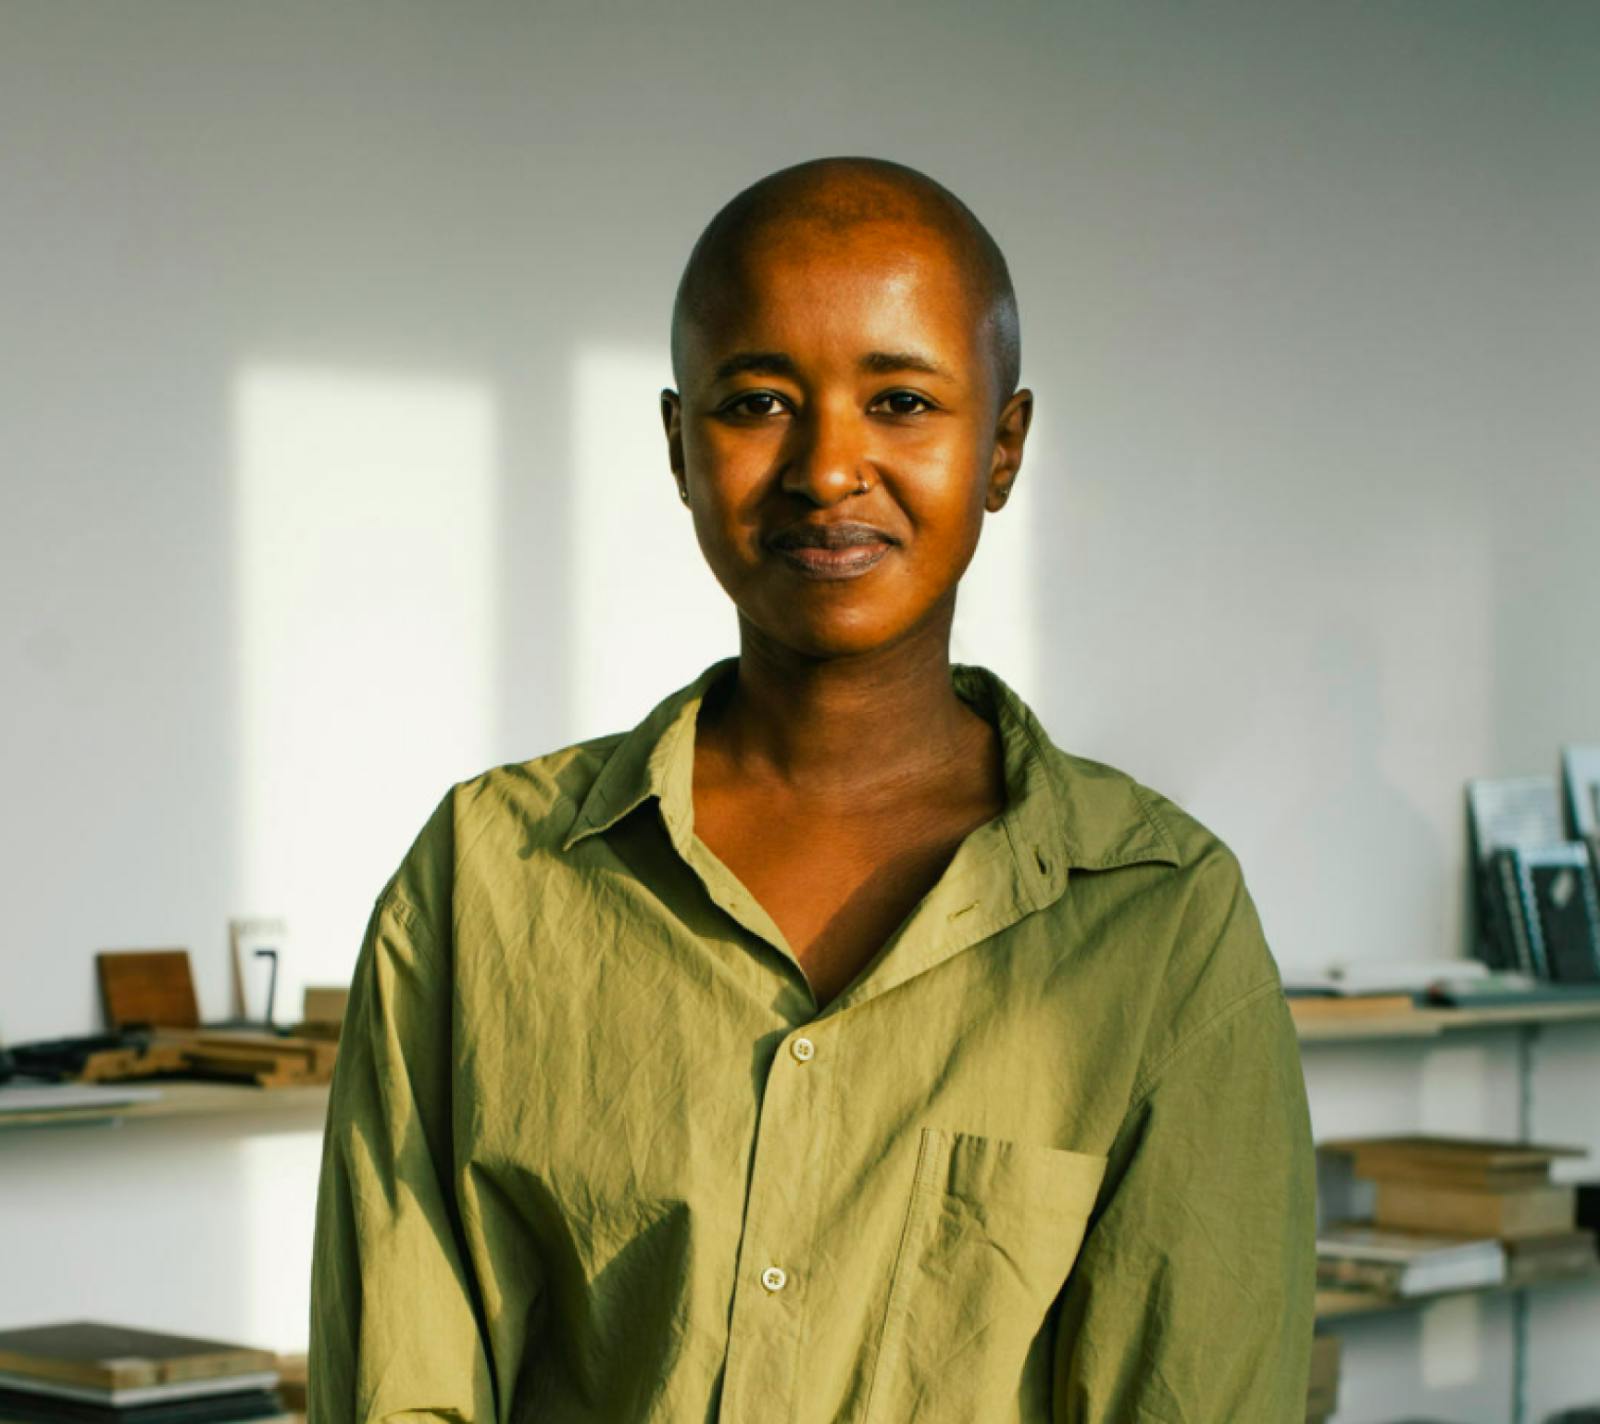 Portrait of a black woman with saved head and a nose piercing looking to the camera. She wears a green shirt and she's in front of a white wall with some shelves blurred in the background